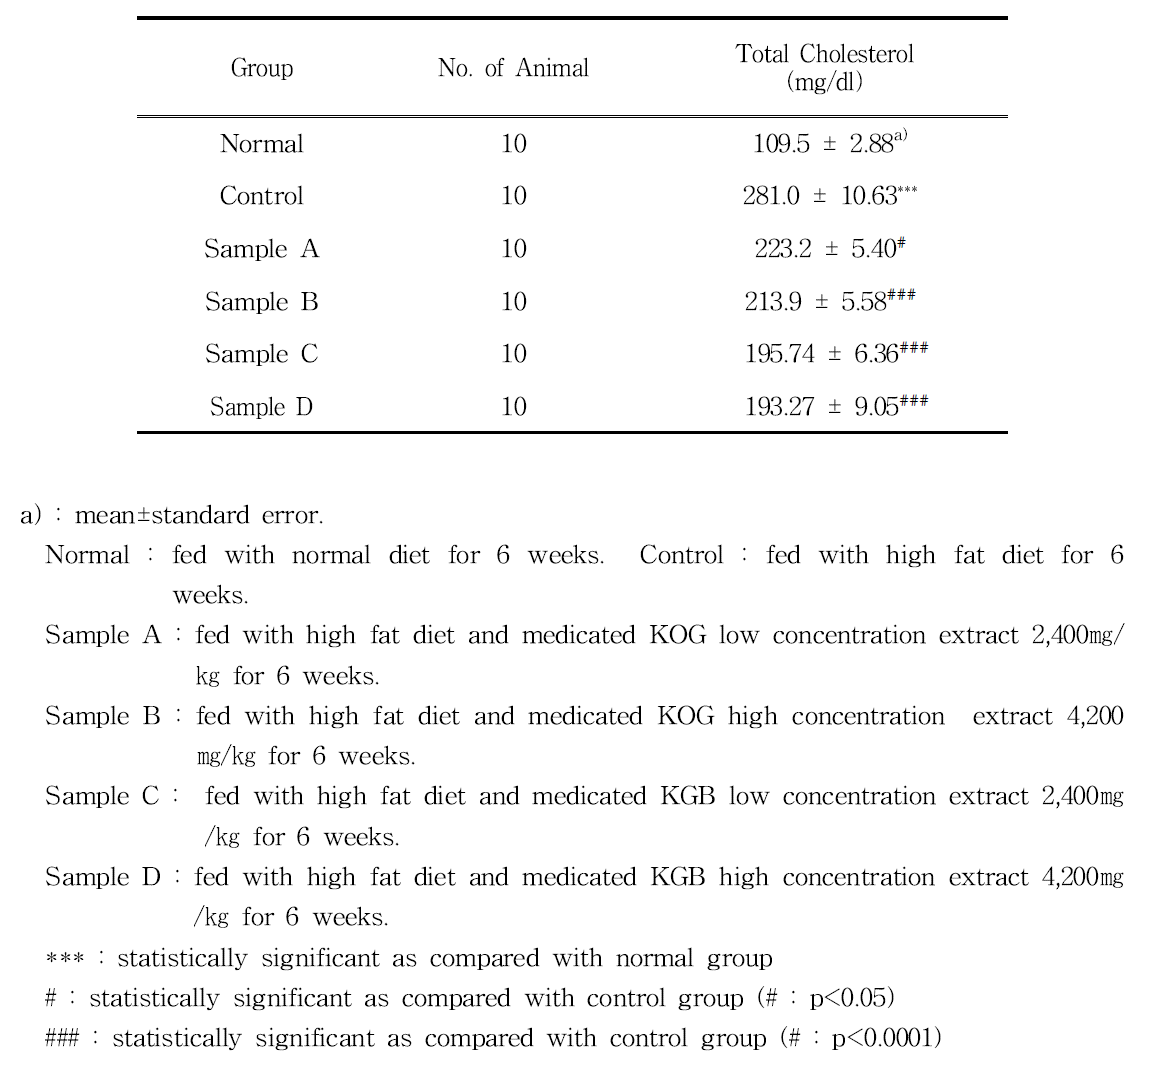 Effects of KOG and KGB on the Serum Total Cholesterol Levels in Rats with High Fat Diet